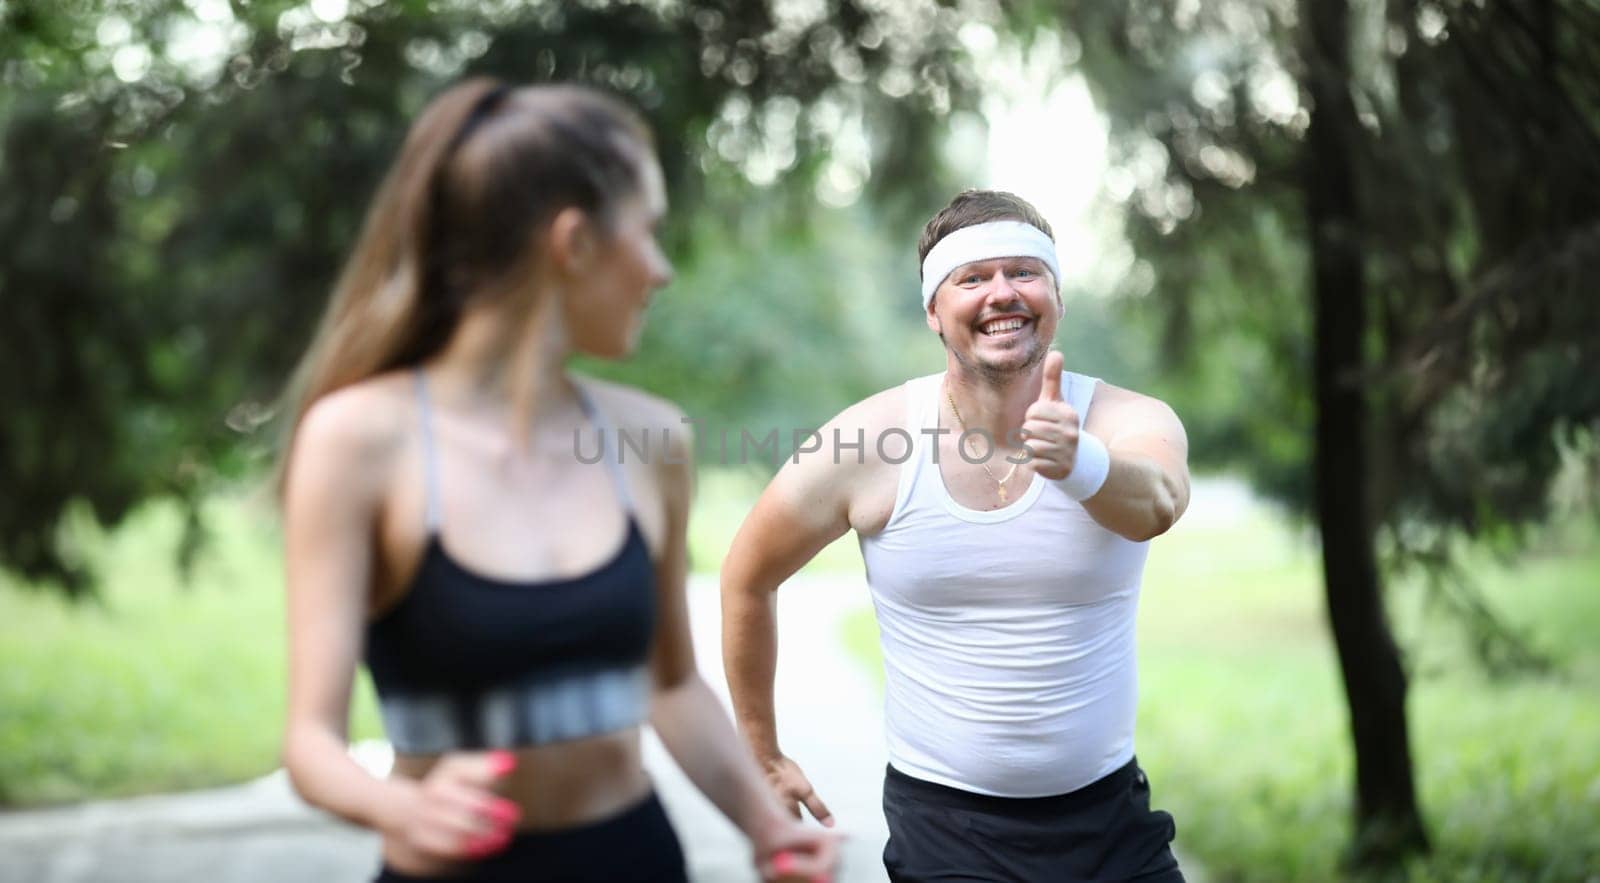 Portrait of couple training together in park. Man making funny faces. Middle-aged male showing thumbs up and running in sportswear. Sport and active lifestyle concept